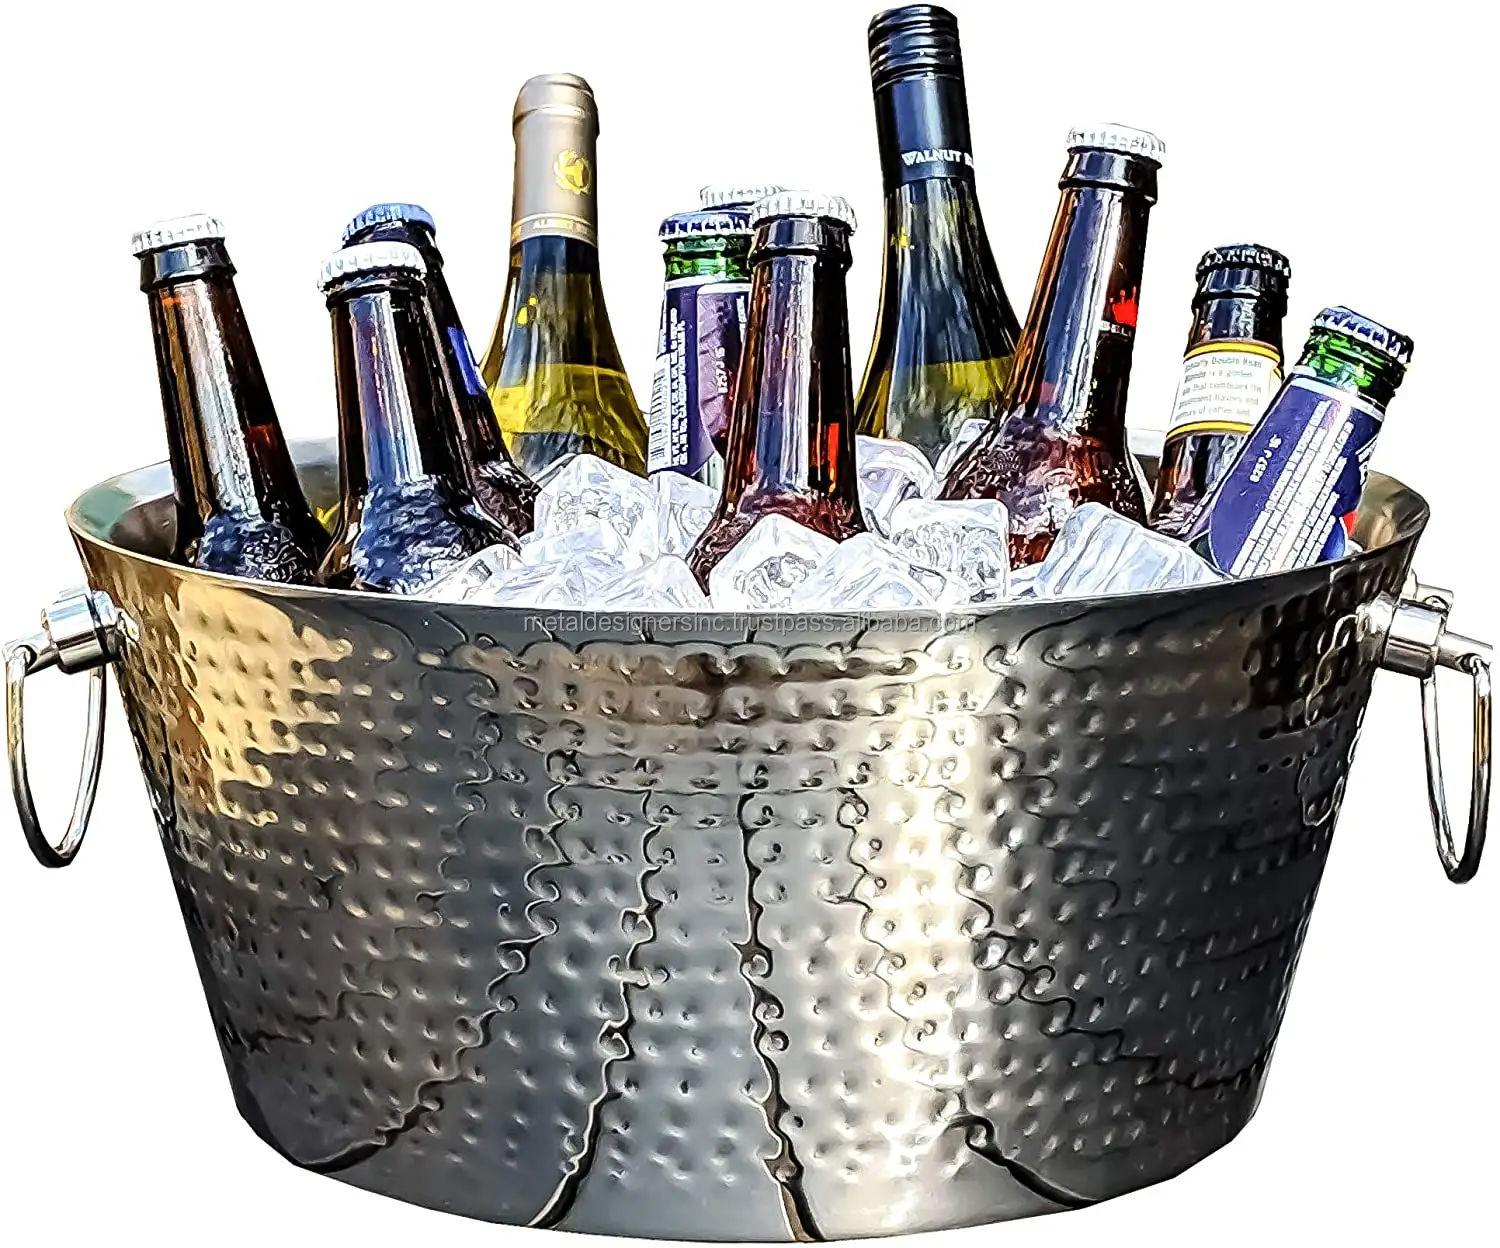 Hammered Double Wall Round Beverage Tub Stainless Steel Ice Bucket Metal Drink Cooler House Partyware w/ Handles Small